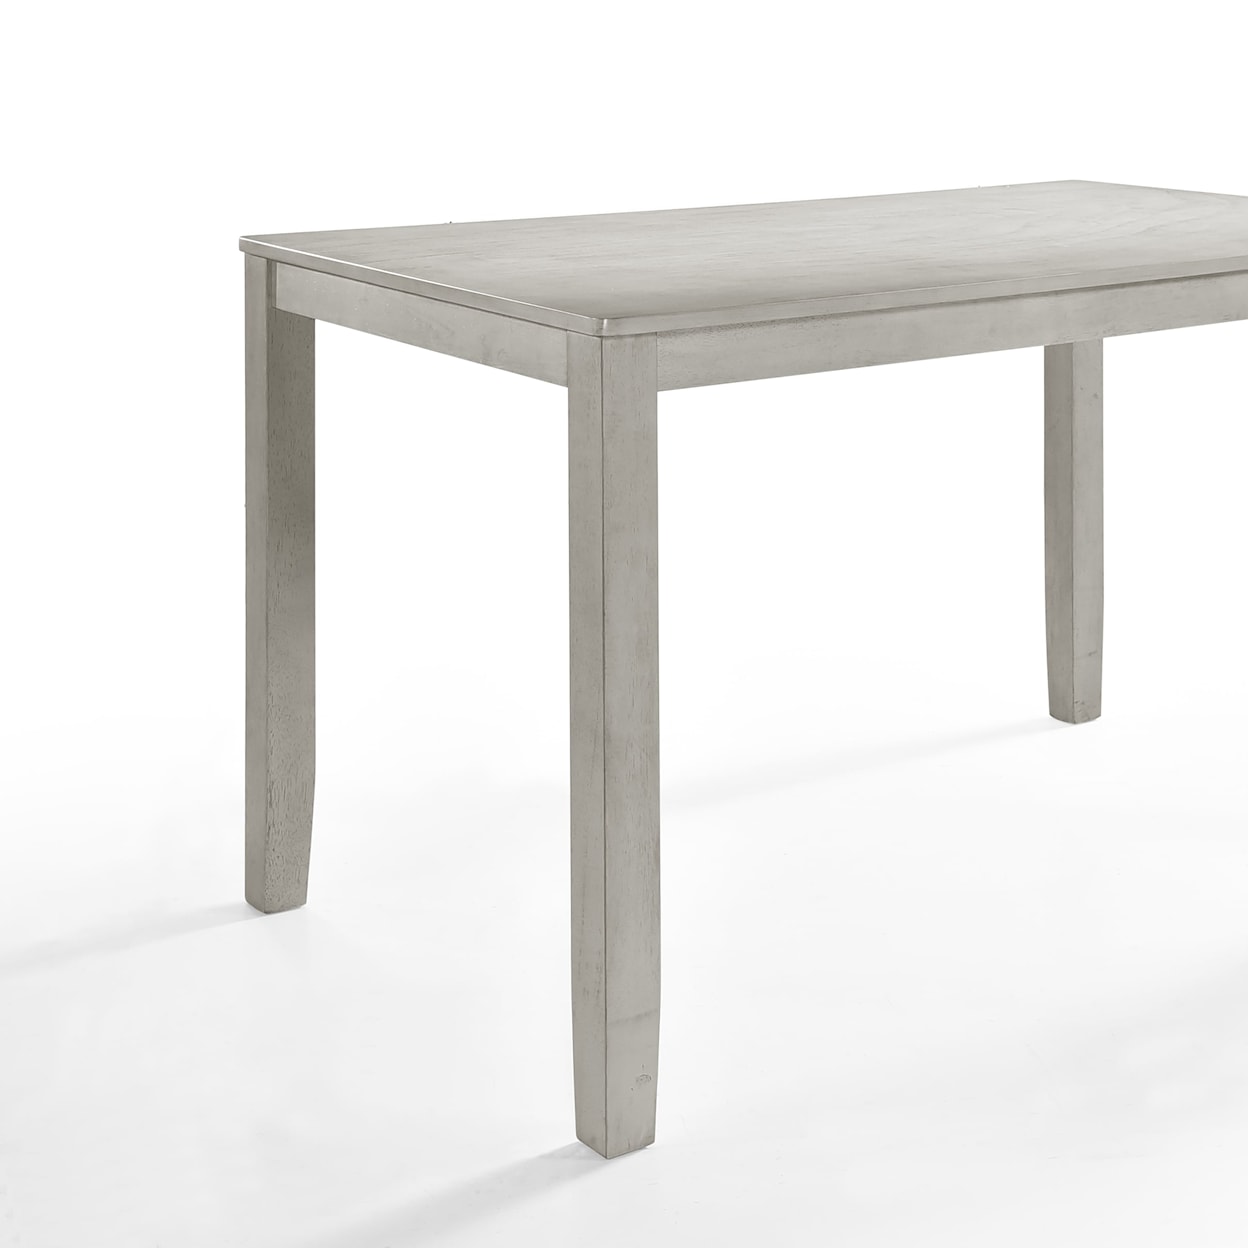 New Classic Furniture Pascal Counter Dining Table